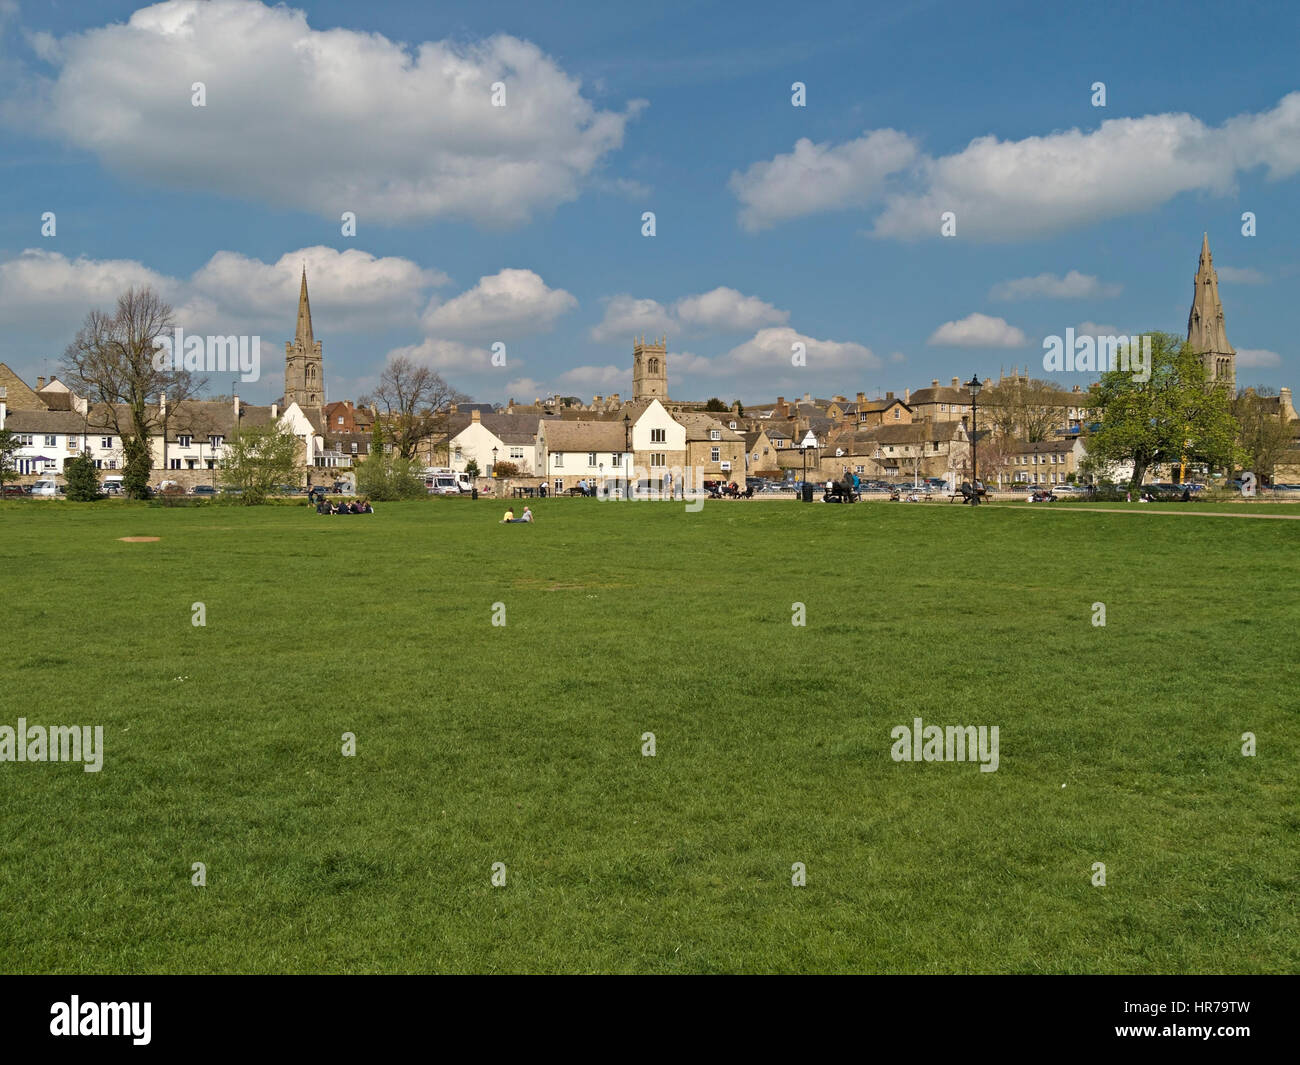 Stamford skyline with green water meadows in foreground and blue sky above, Lincolnshire, England, UK Stock Photo